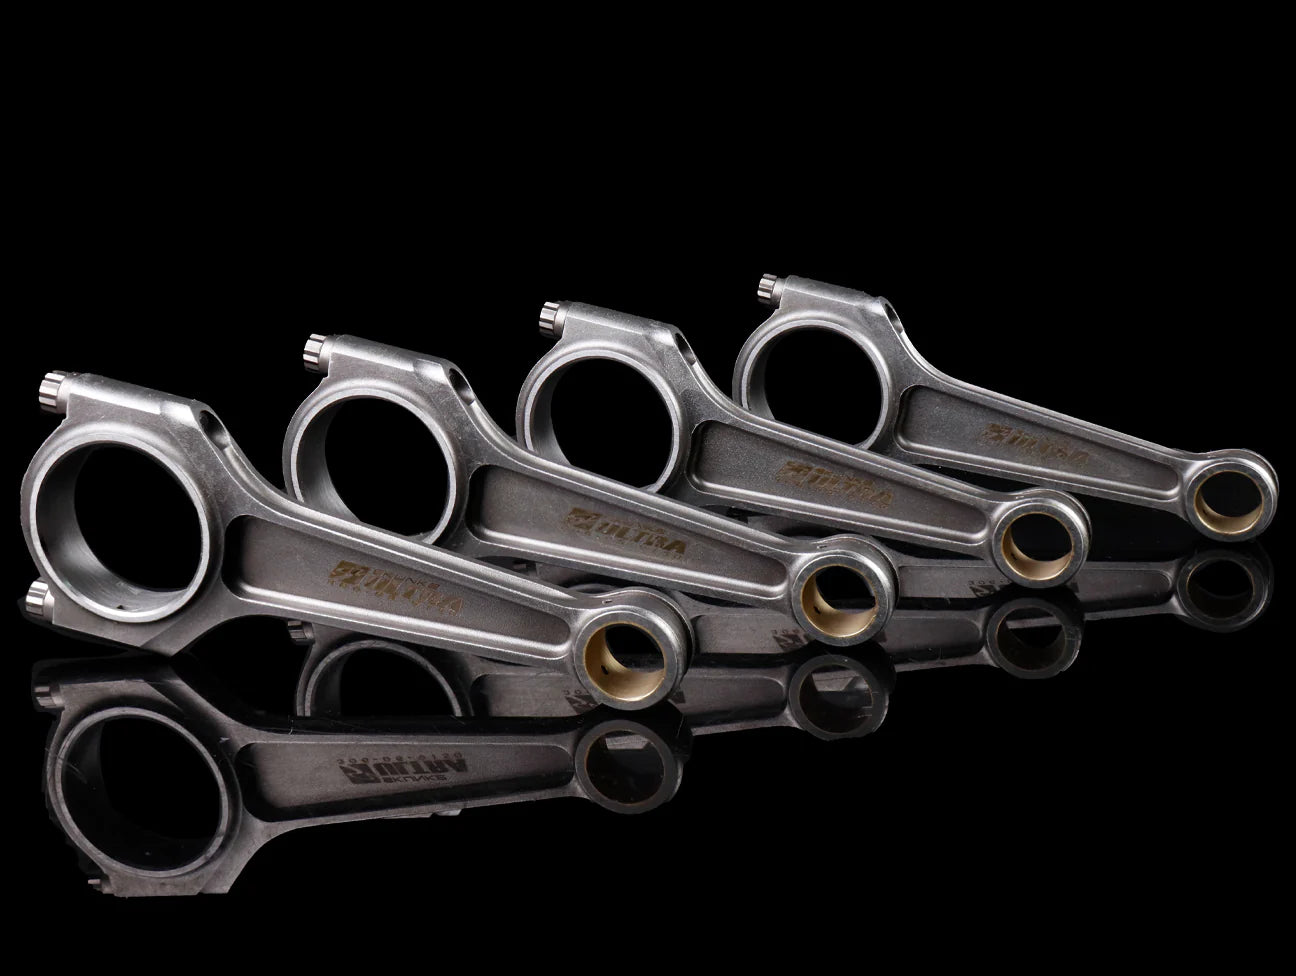 SKUNK2 ULTRA CONNECTING RODS